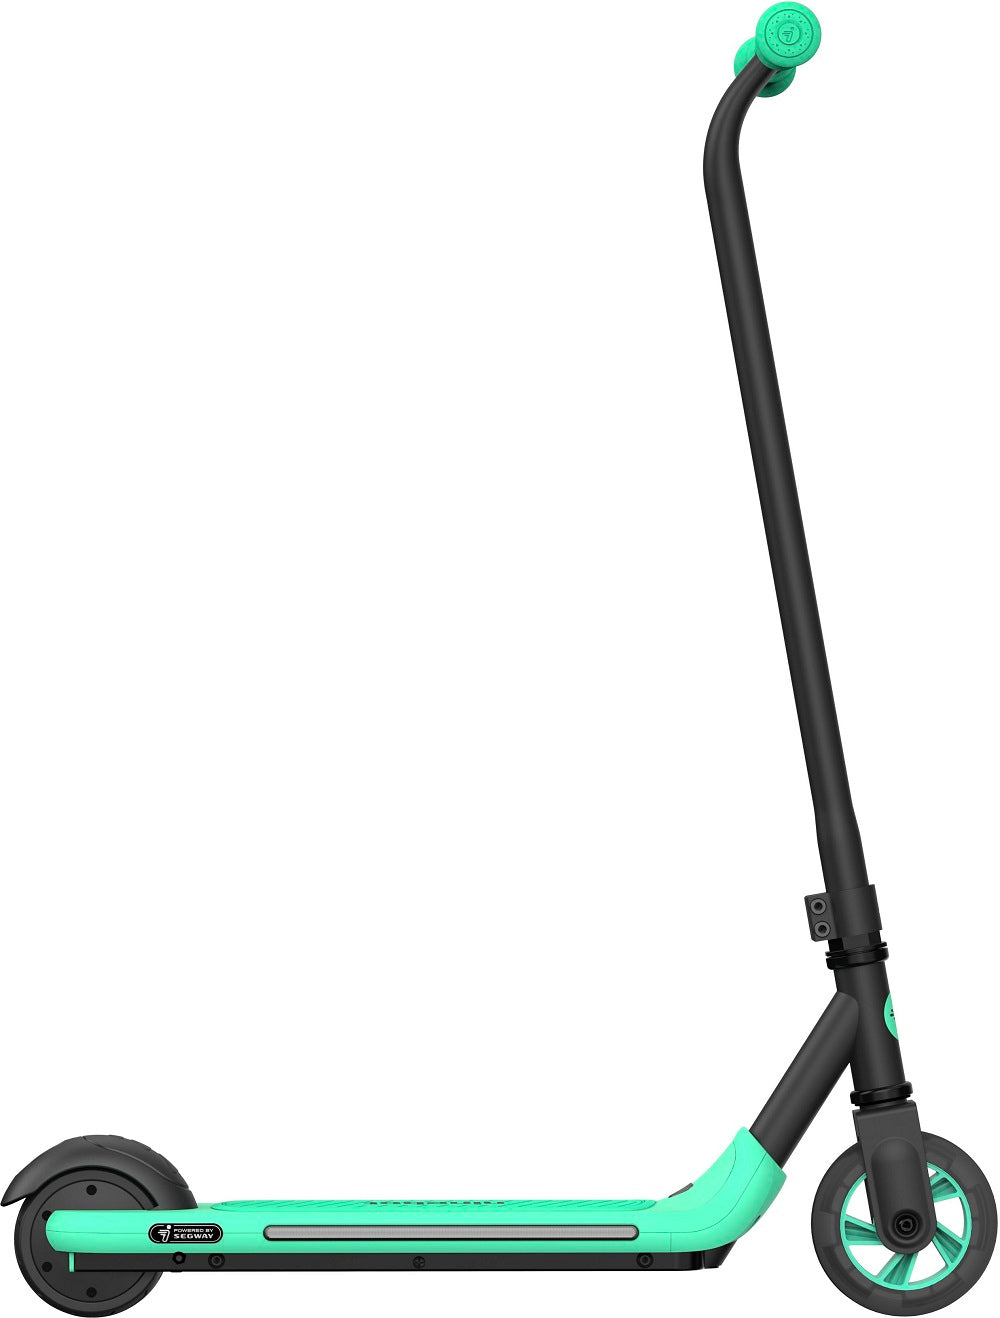 Segway Ninebot A6 Kids Electric KickScooter with 7.4 mph Max Speed - Black (Used)